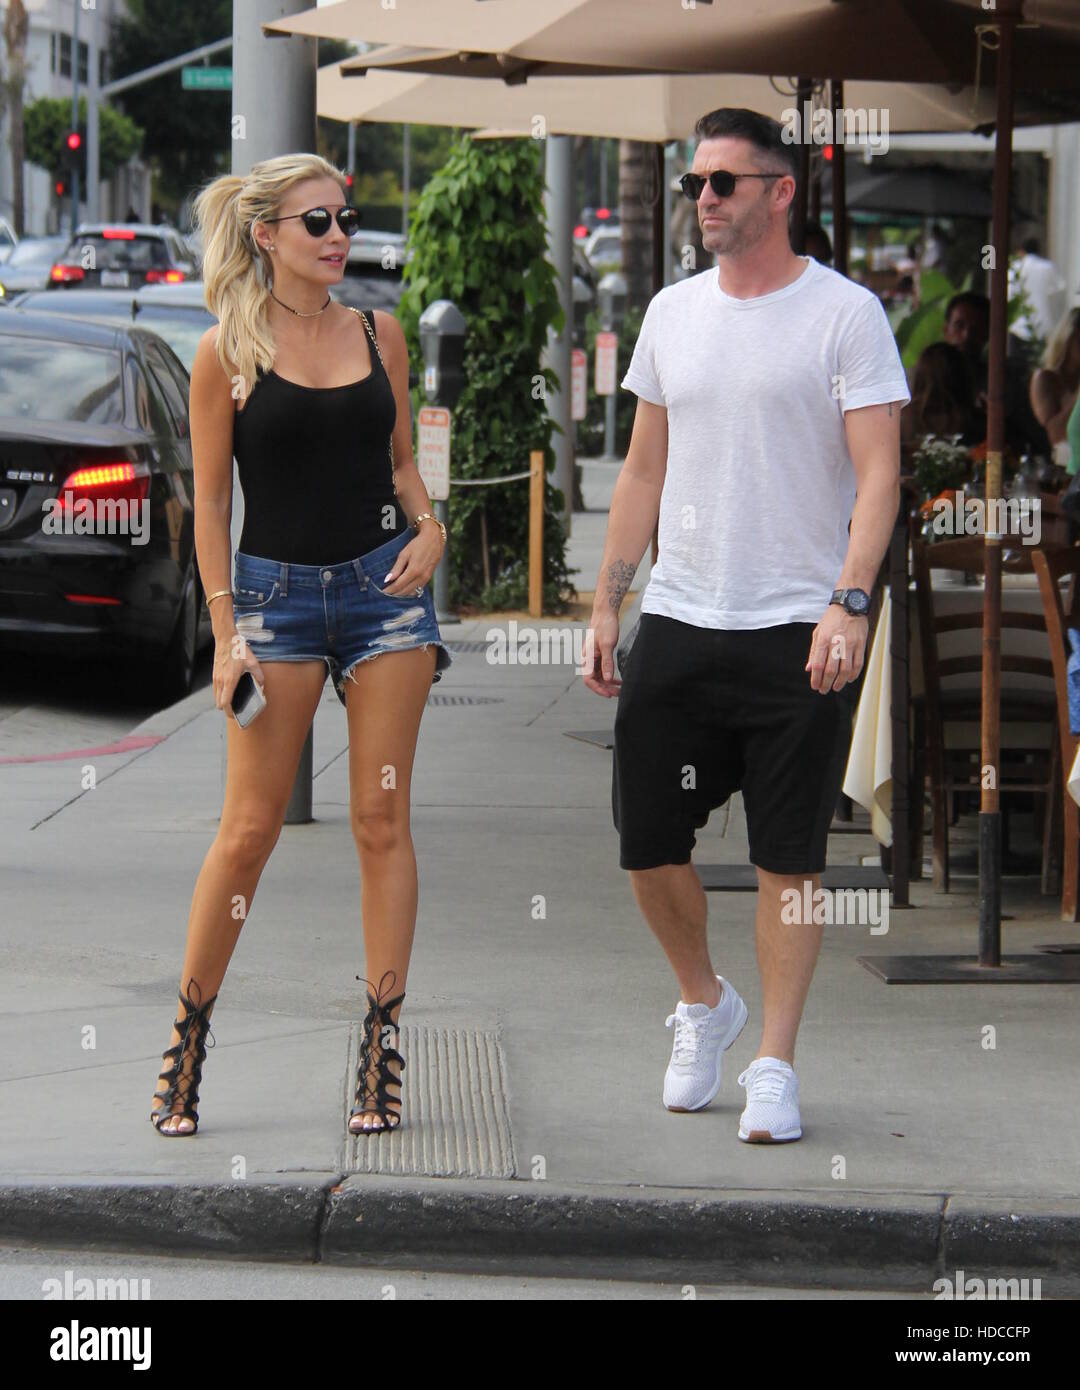 Claudine Palmer, model and wife of Liverpool footballer Robbie Keane, out  shopping after posing as a model in a photoshoot for Stock Photo - Alamy